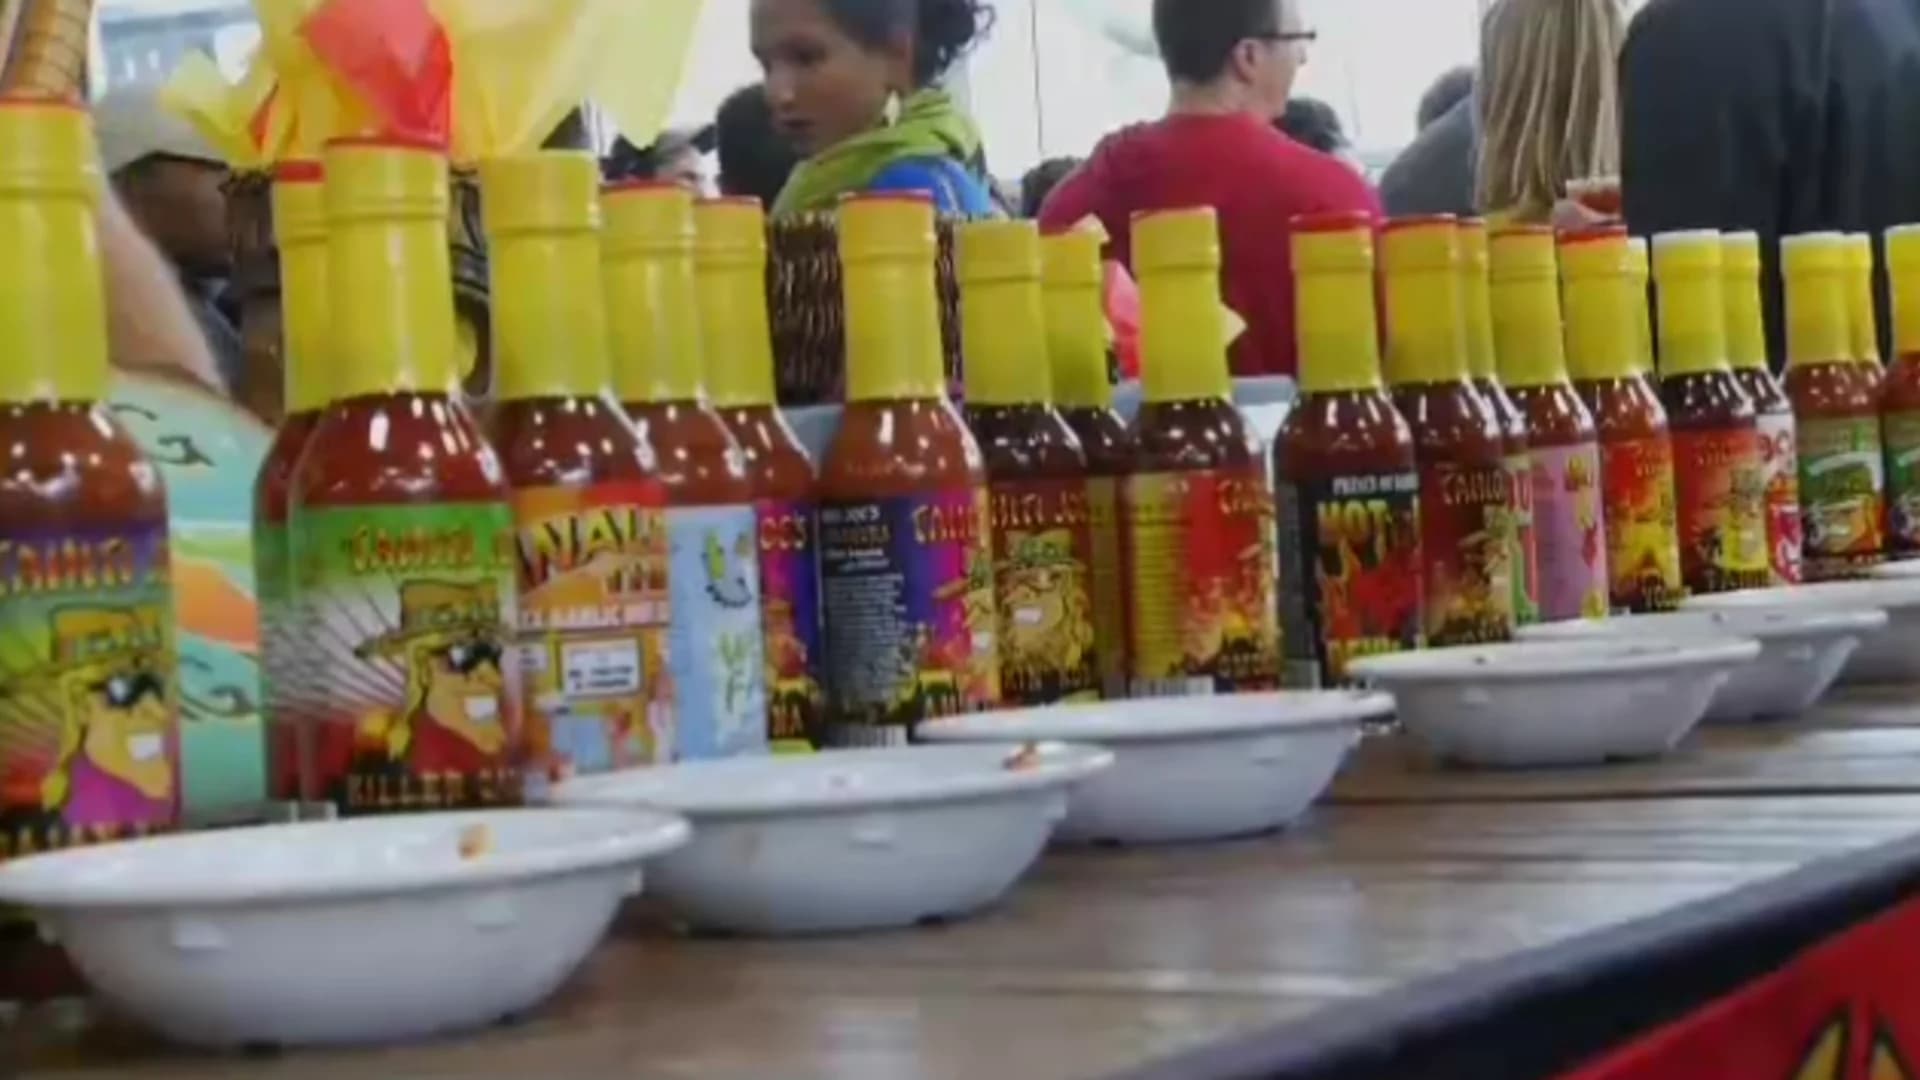 New Yorkers get spicy at 5th annual Hot Sauce Expo